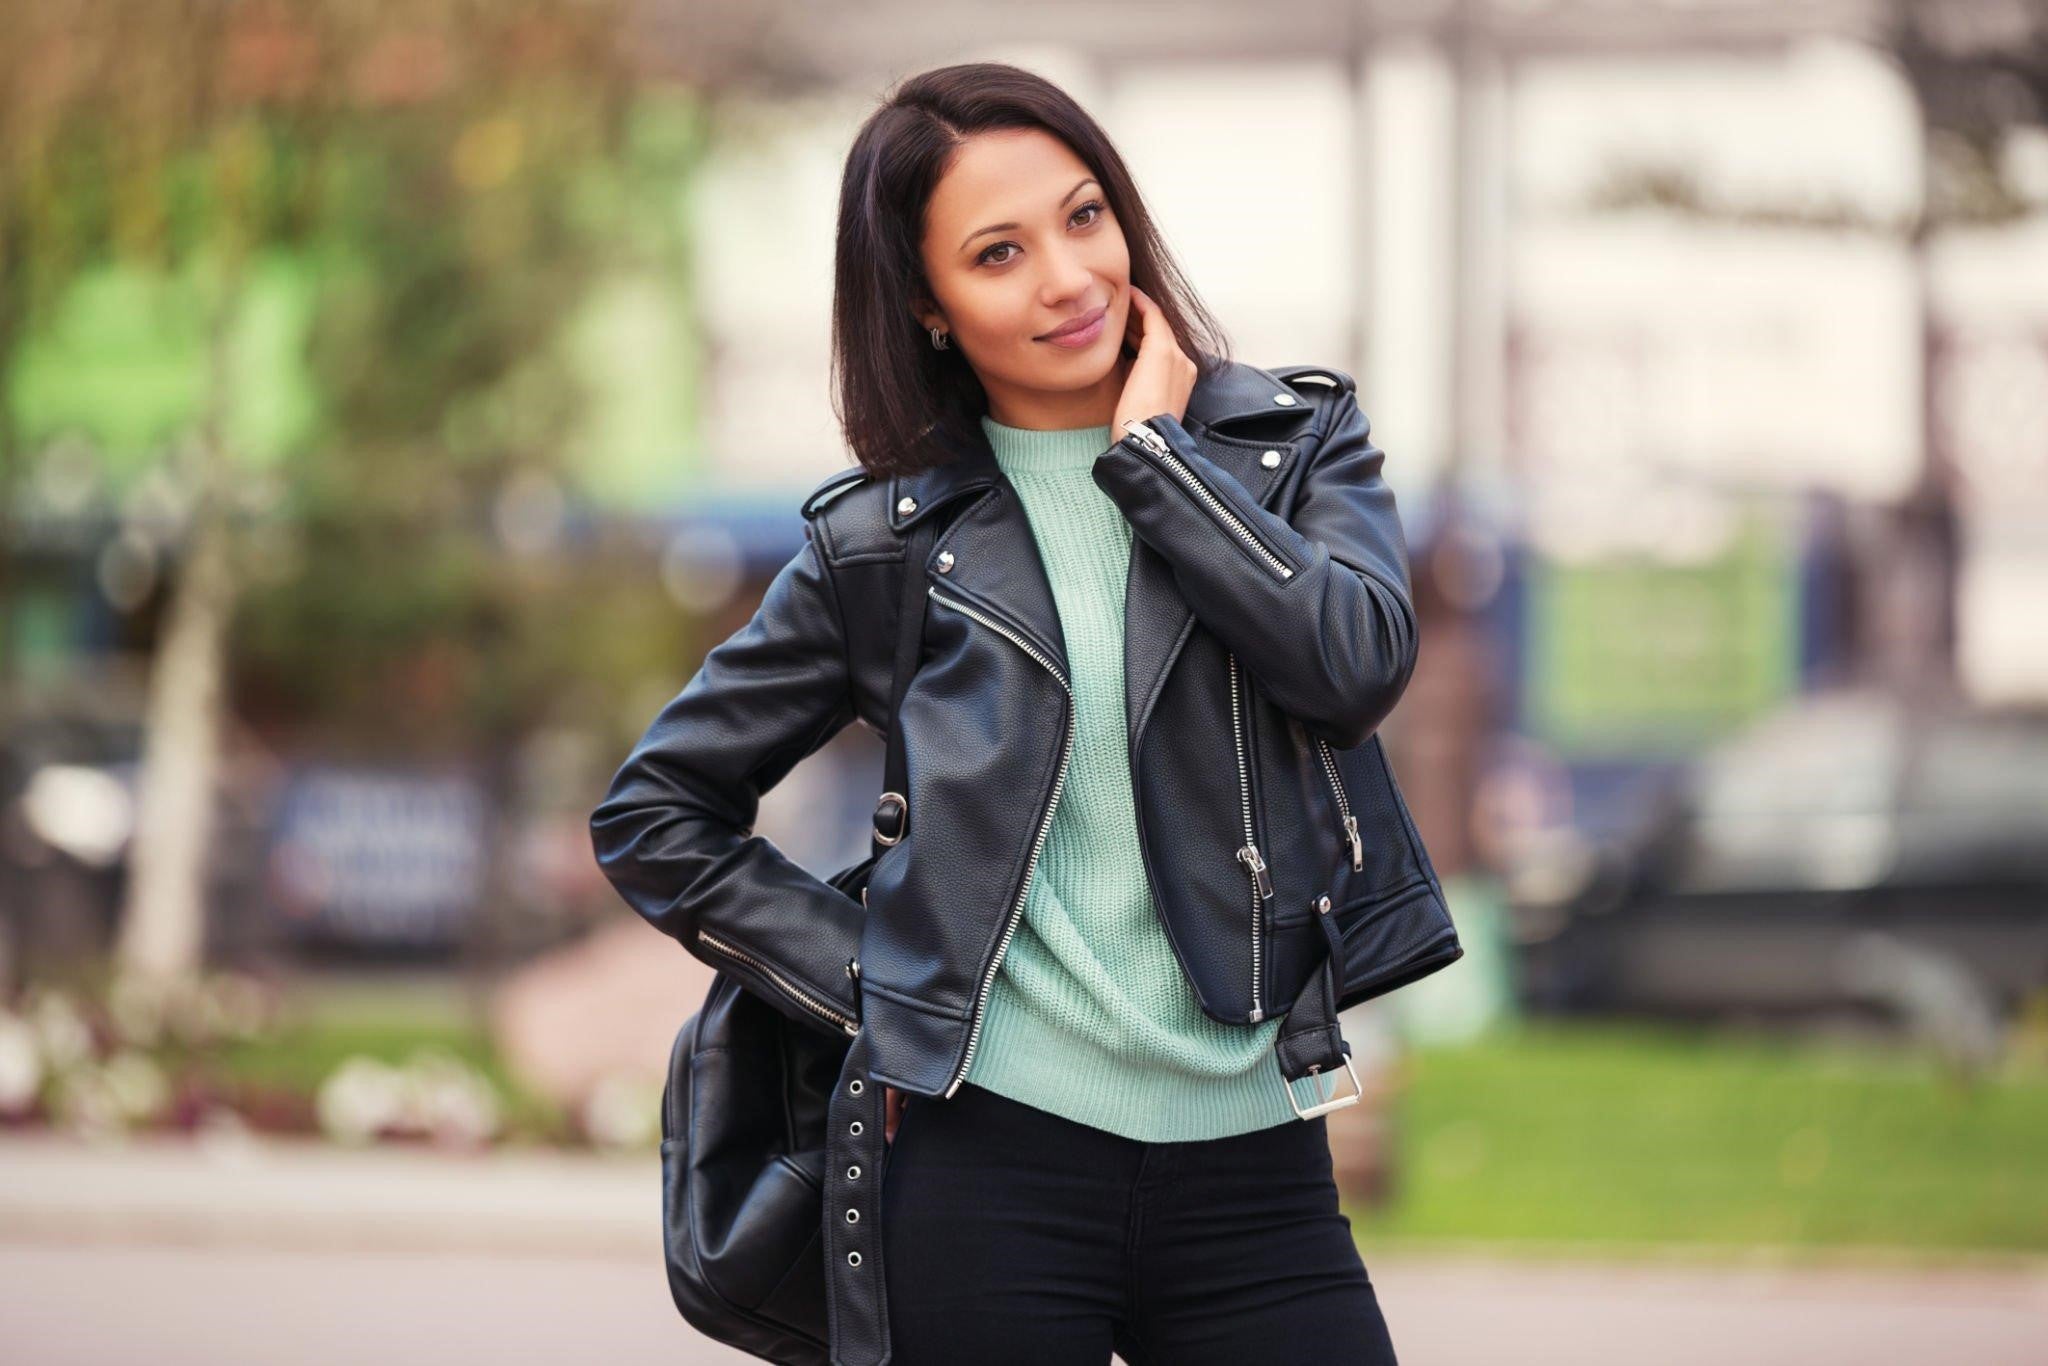 Leather Jacket Outfits & How To Wear a Leather Jacket